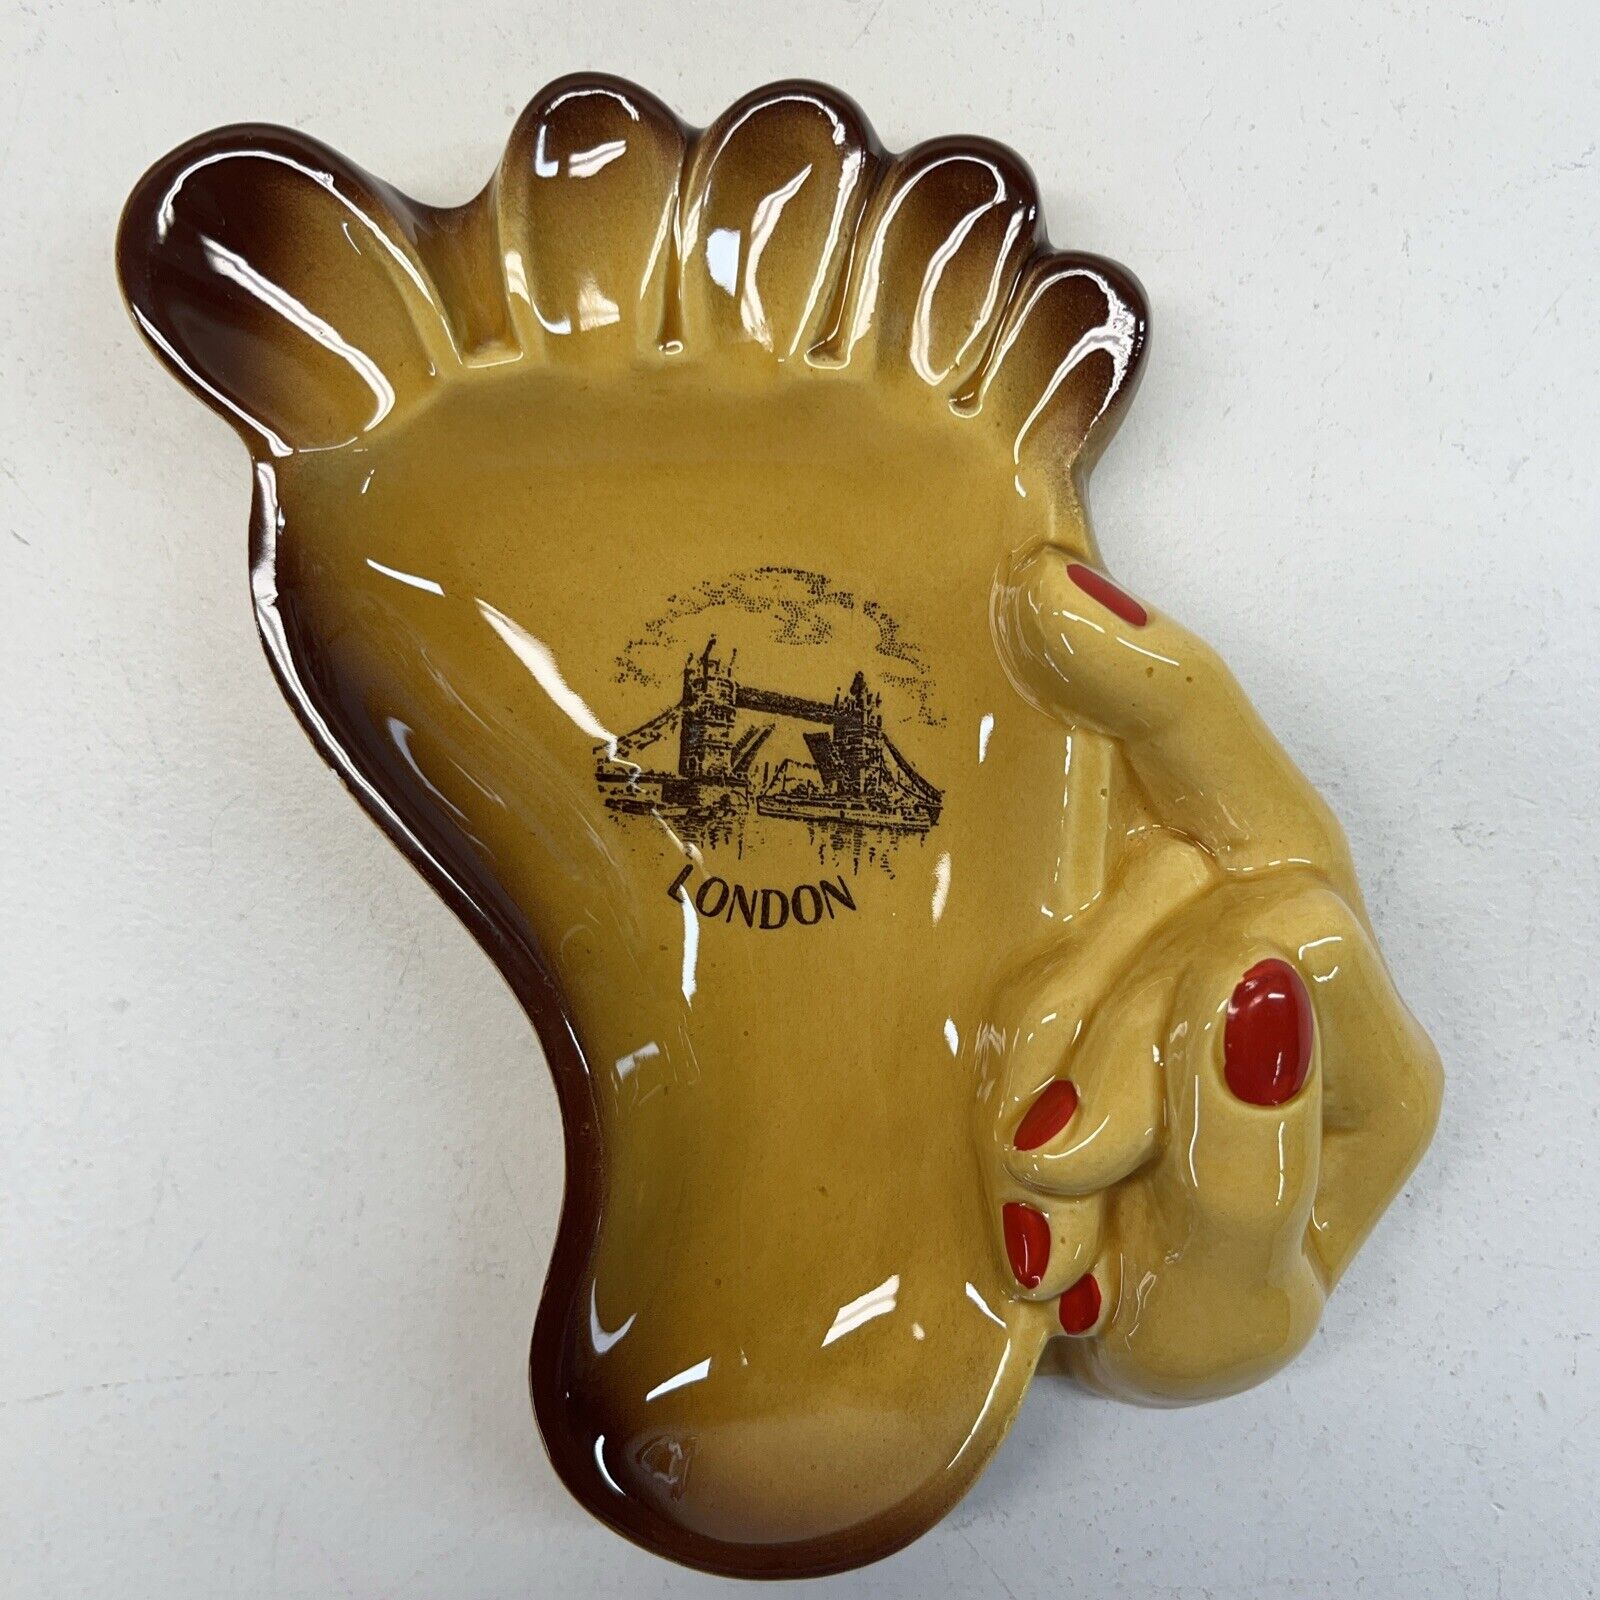 UNIQUE/ODD Vintage Ceramic Hand with Foot Trinket Dish Made in Japan